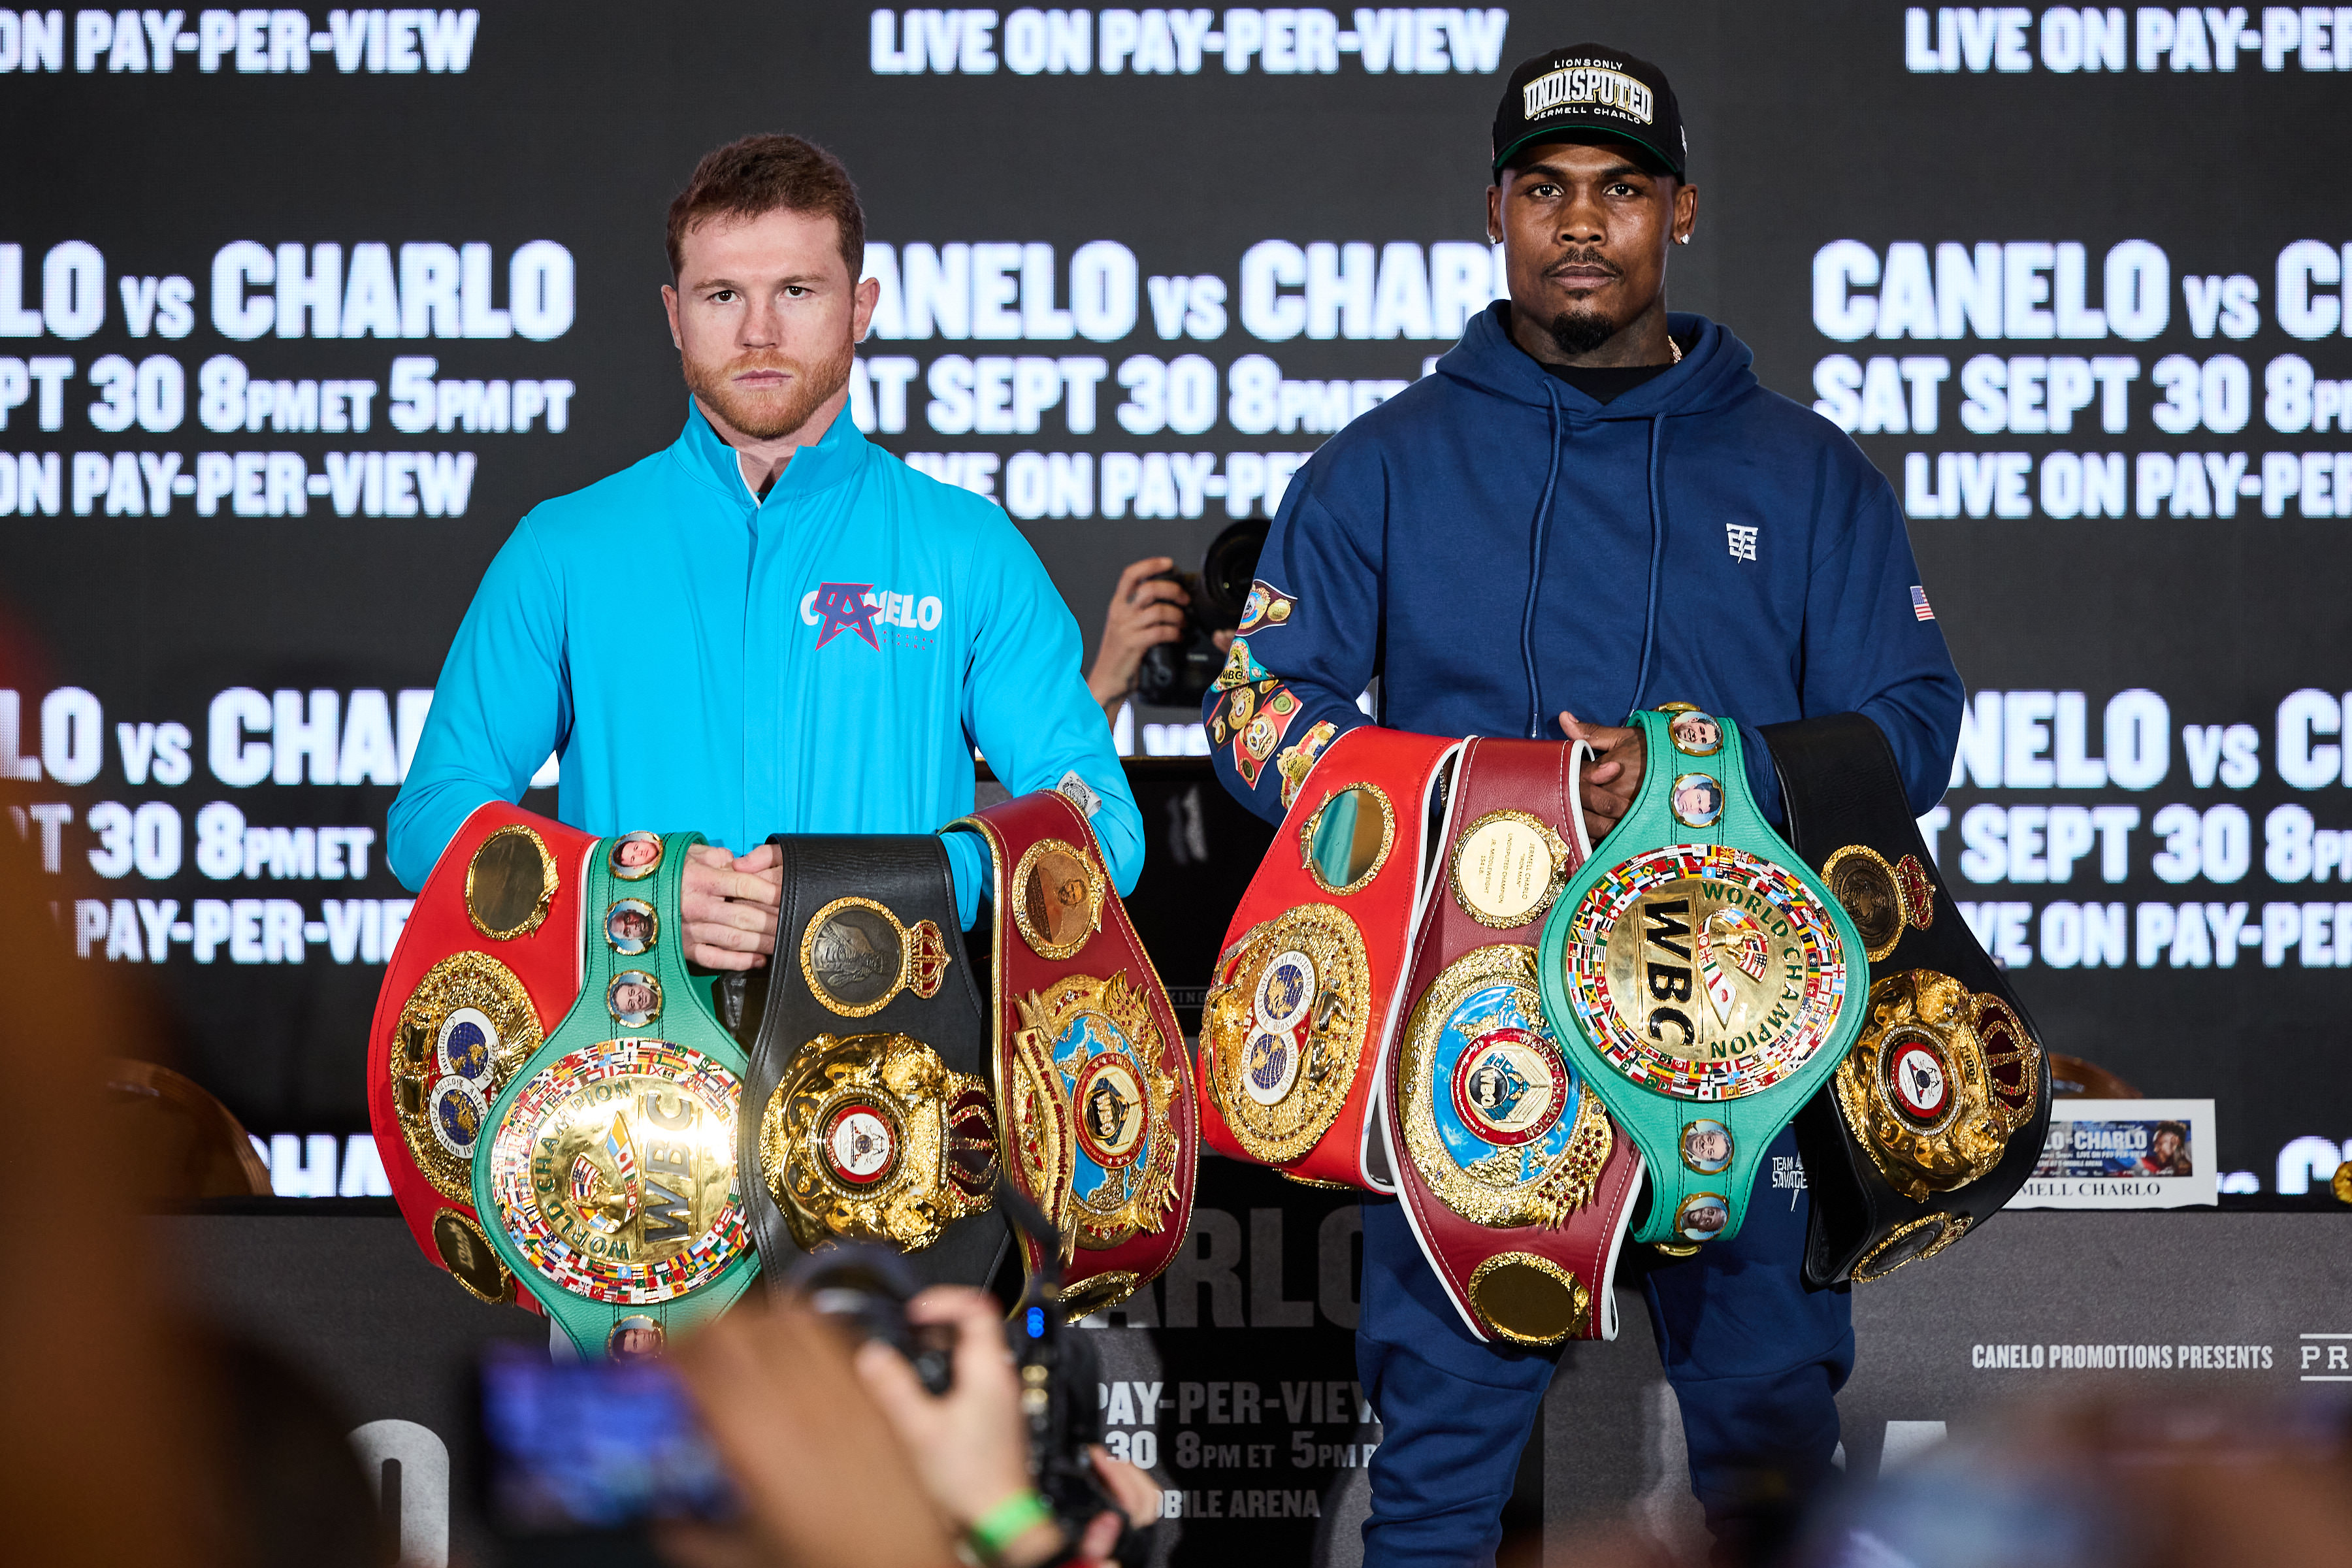 Will Canelo Alvarez keep his crown or can Jermell Charlo score a career-best win?